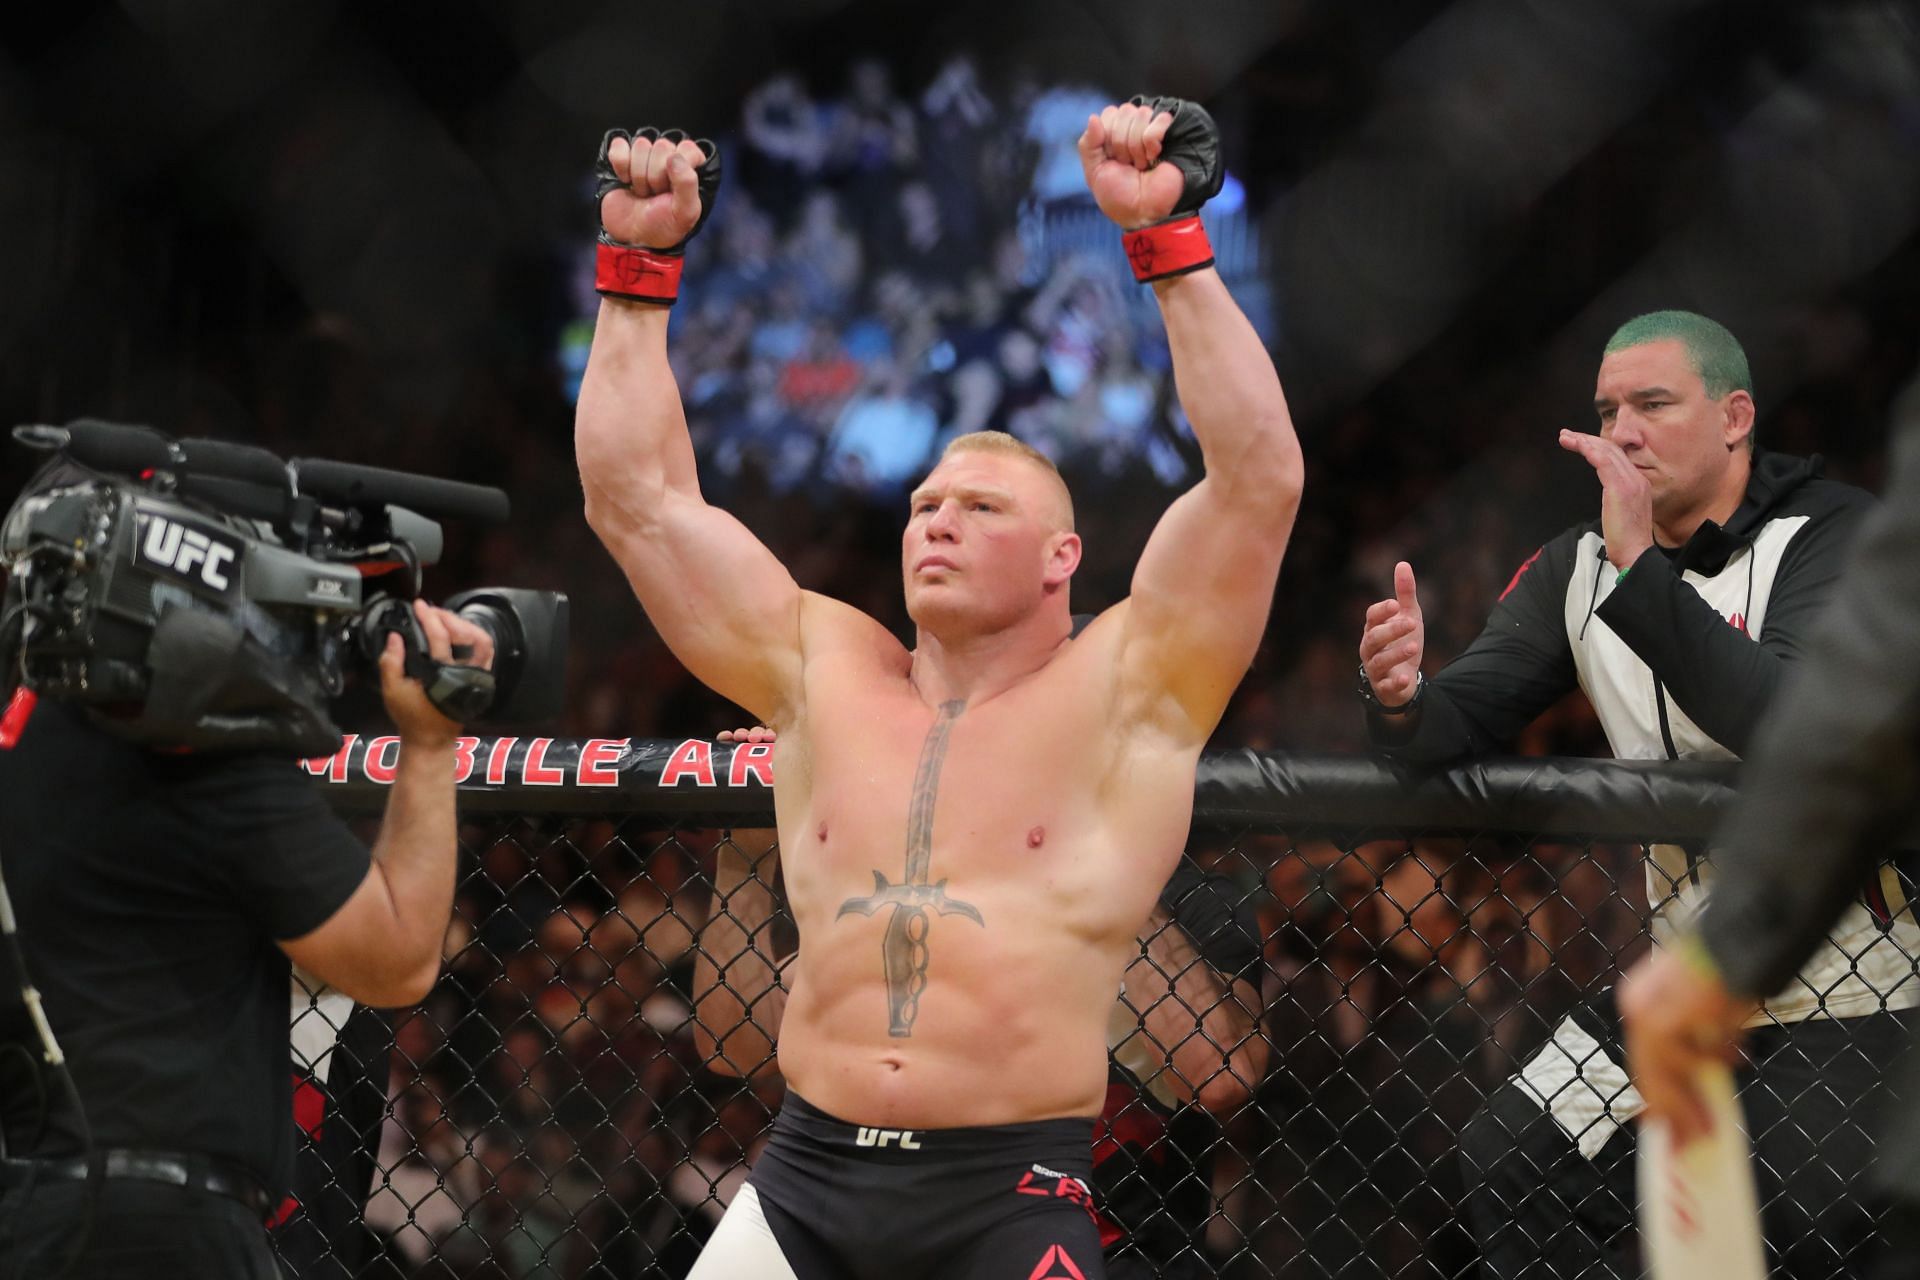 Should Brock Lesnar be considered amongst the all-time great heavyweights?